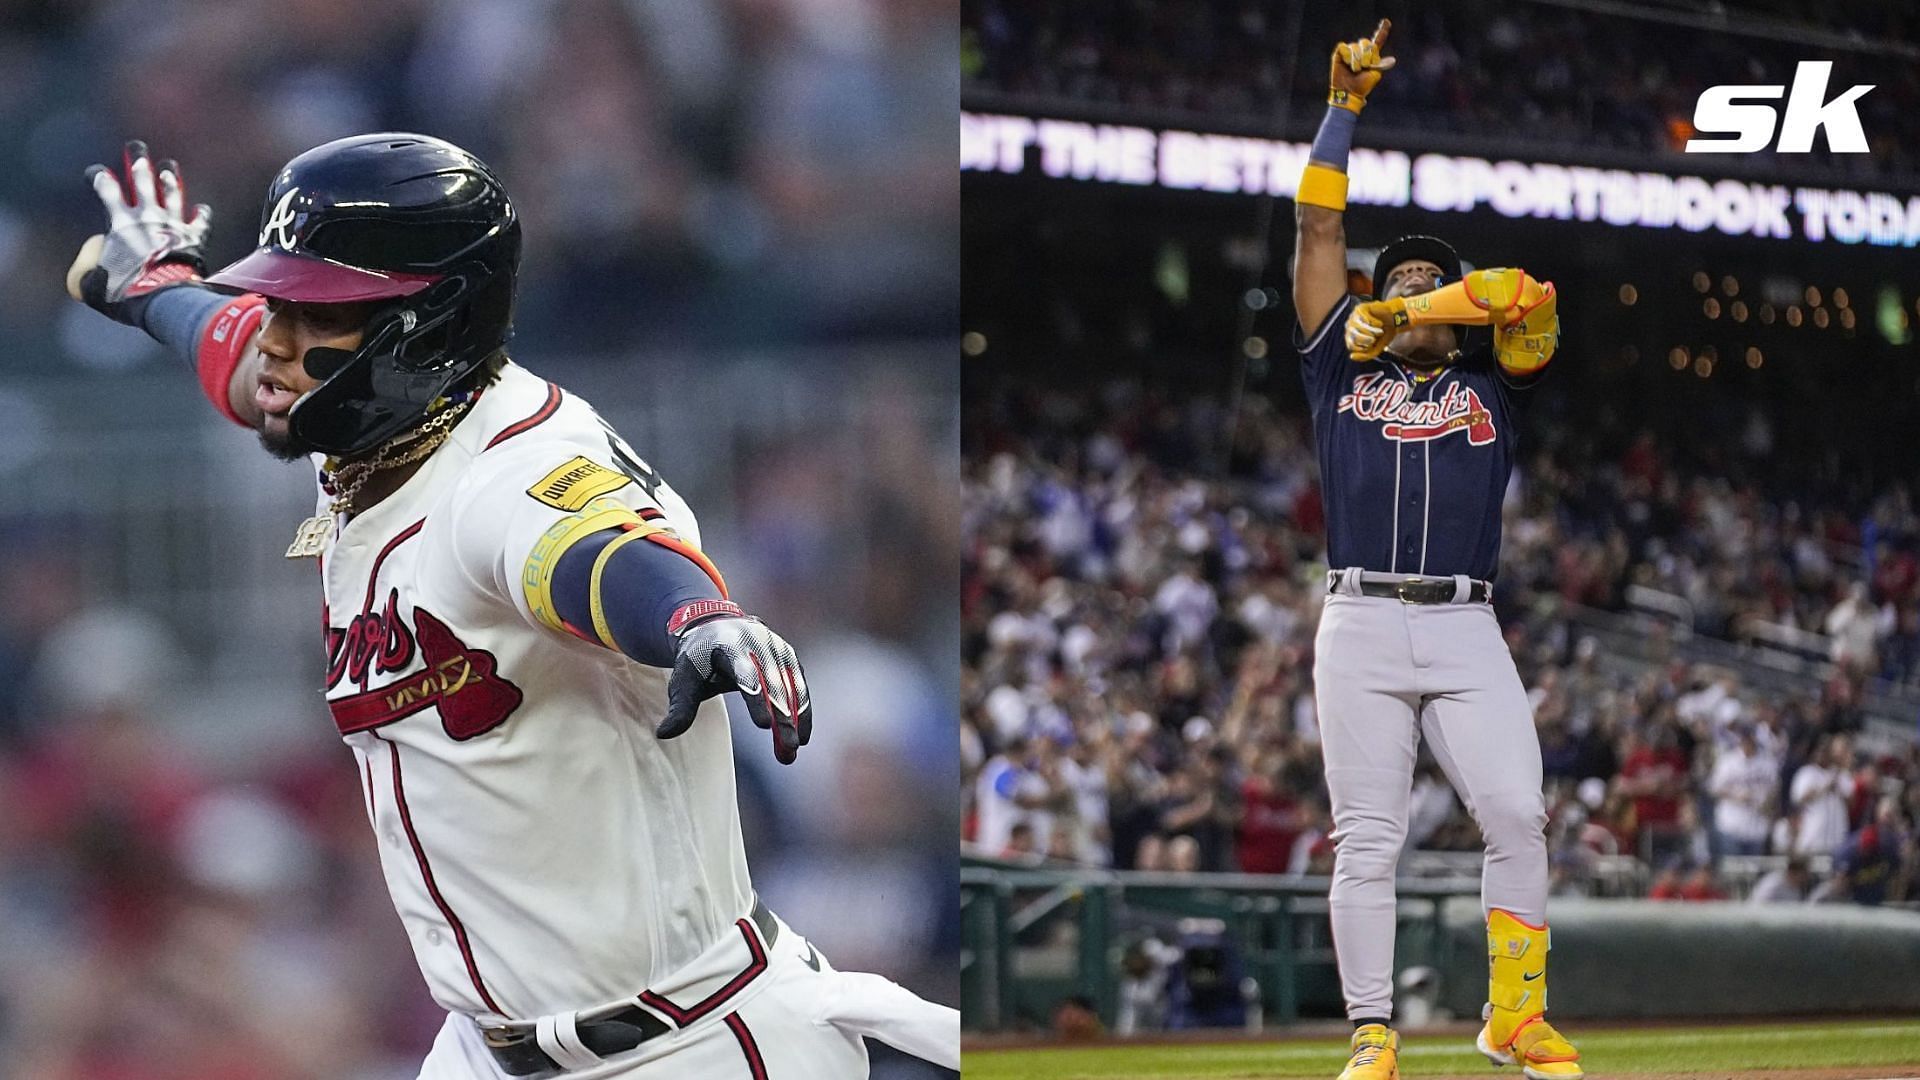 Atlanta's Ronald Acuña Jr. unanimous NL Most Valuable Player after